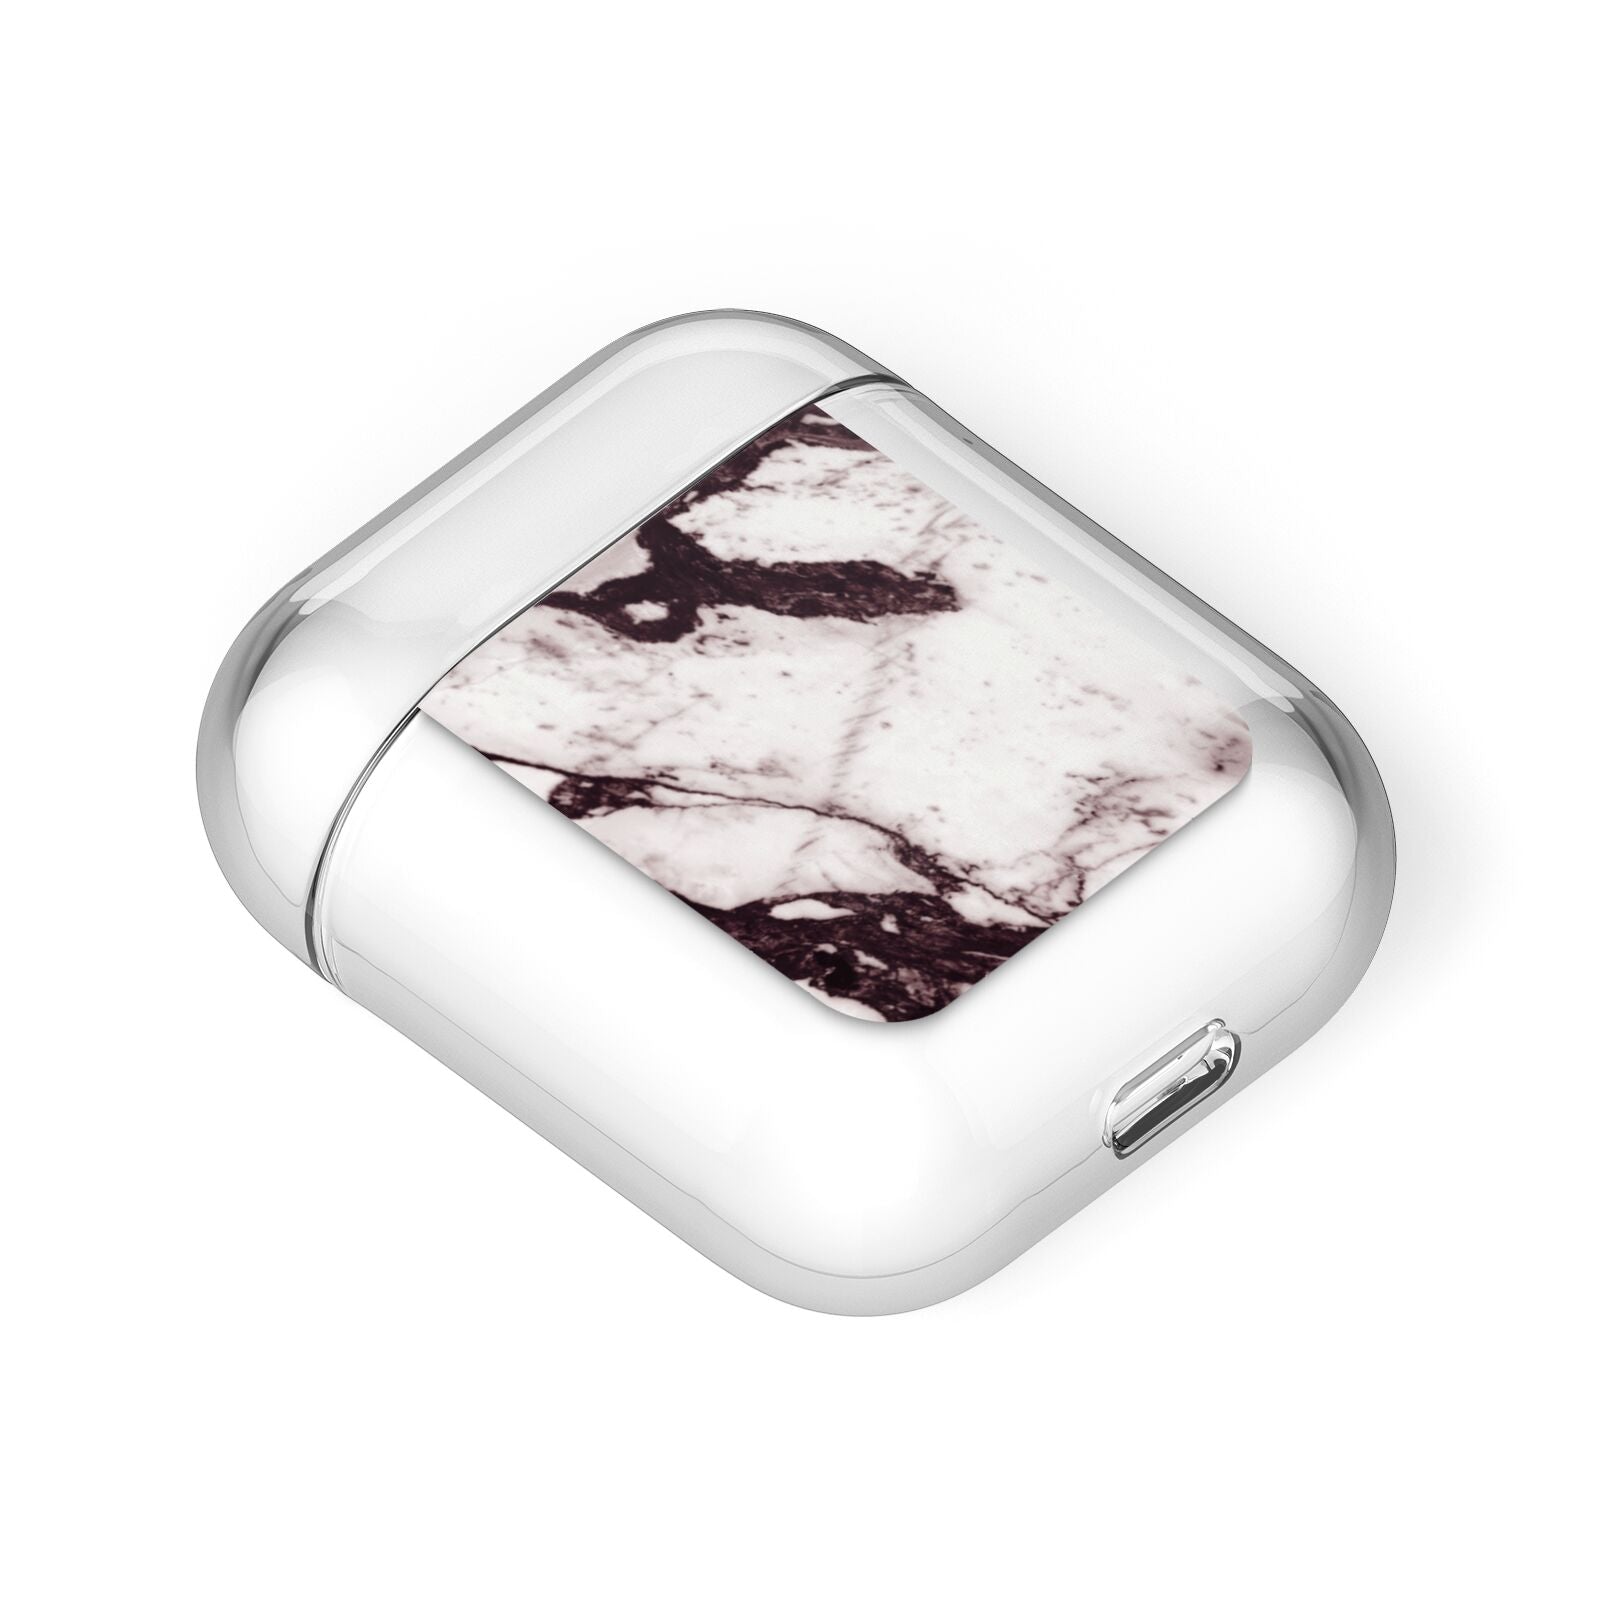 Viola Marble AirPods Case Laid Flat